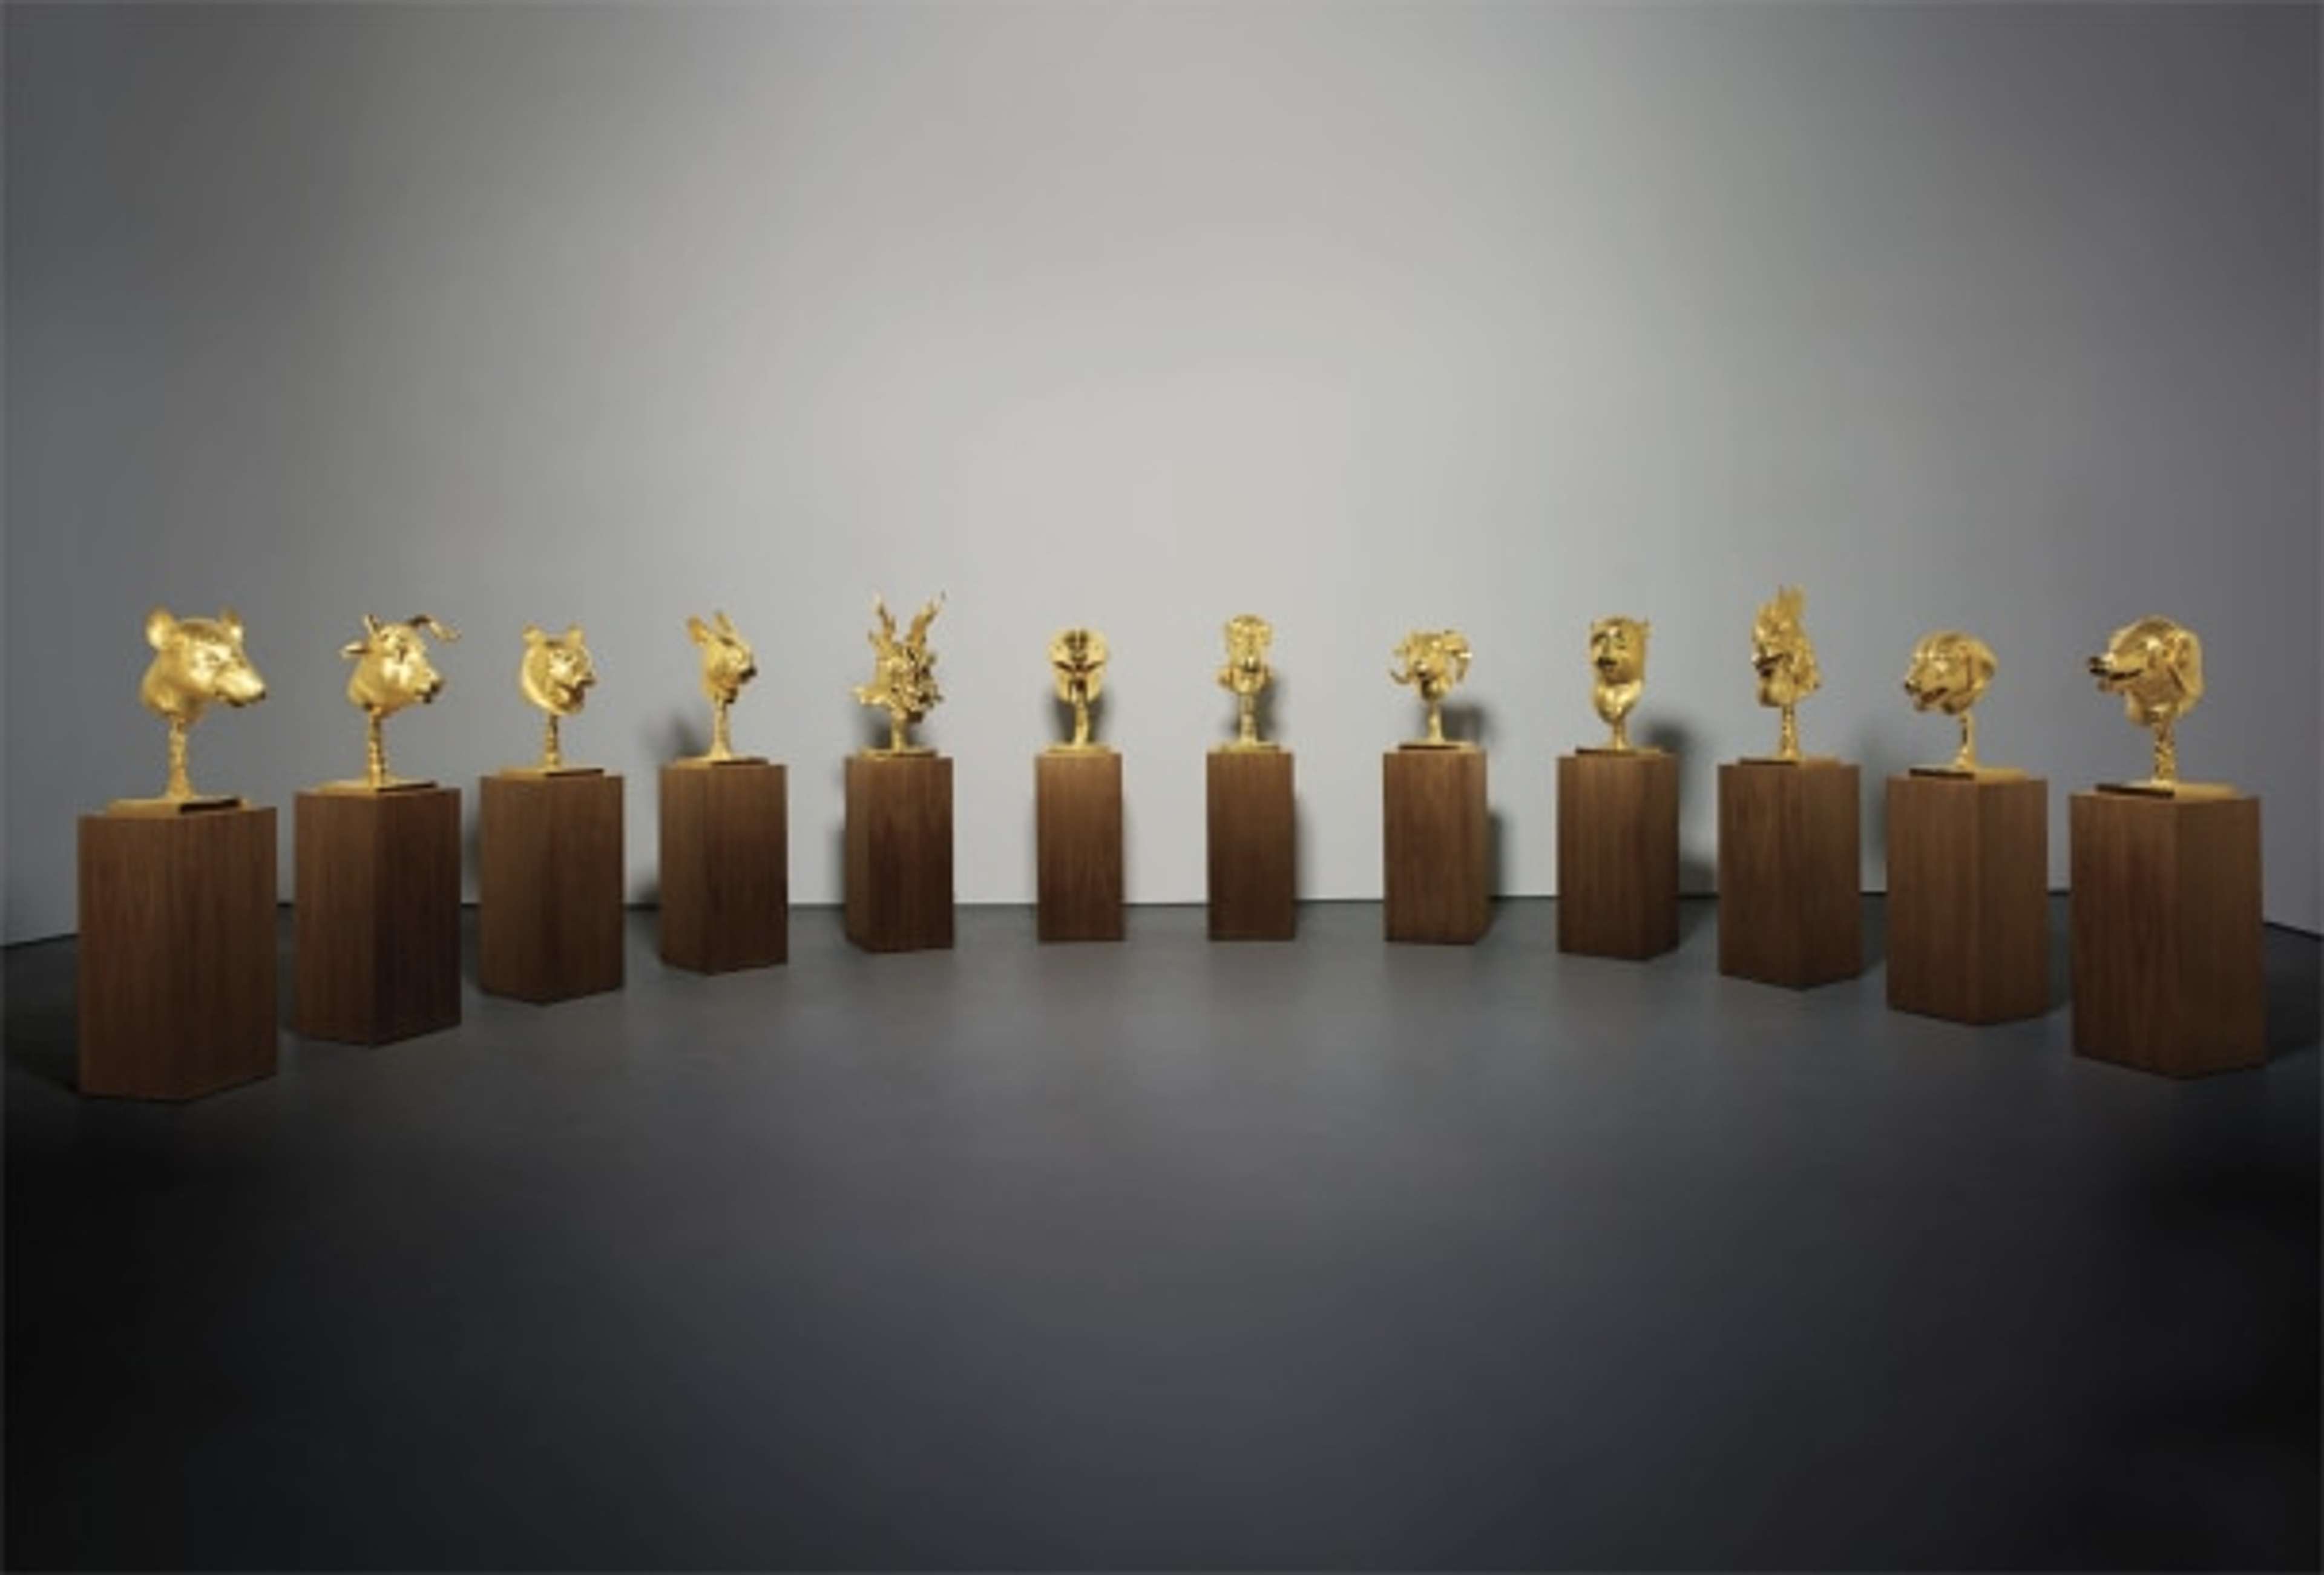 A photograph of twelve polished bronze sculptures placed on brown wood podiums. The sculptures depict the heads of the Chinese zodiac animals, including the rat, ox, tiger, rabbit, dragon, snake, horse, goat, monkey, rooster, dog, and pig. The sculptures are arranged in an open semi-circle formation.